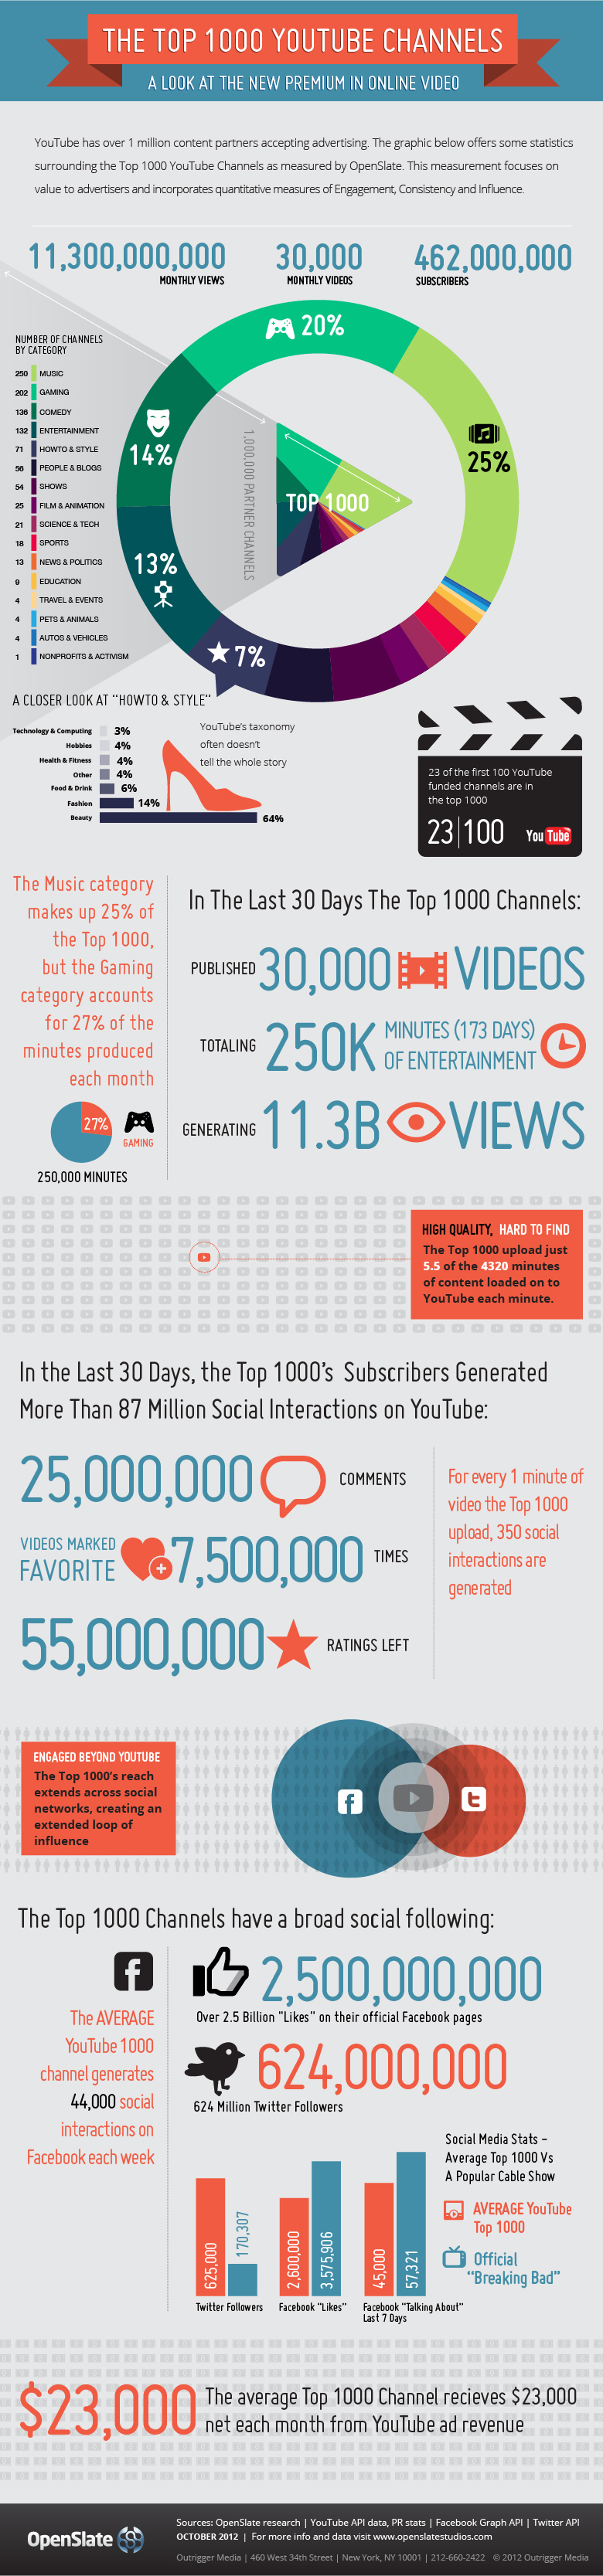 The Top 1000 YouTube Channels